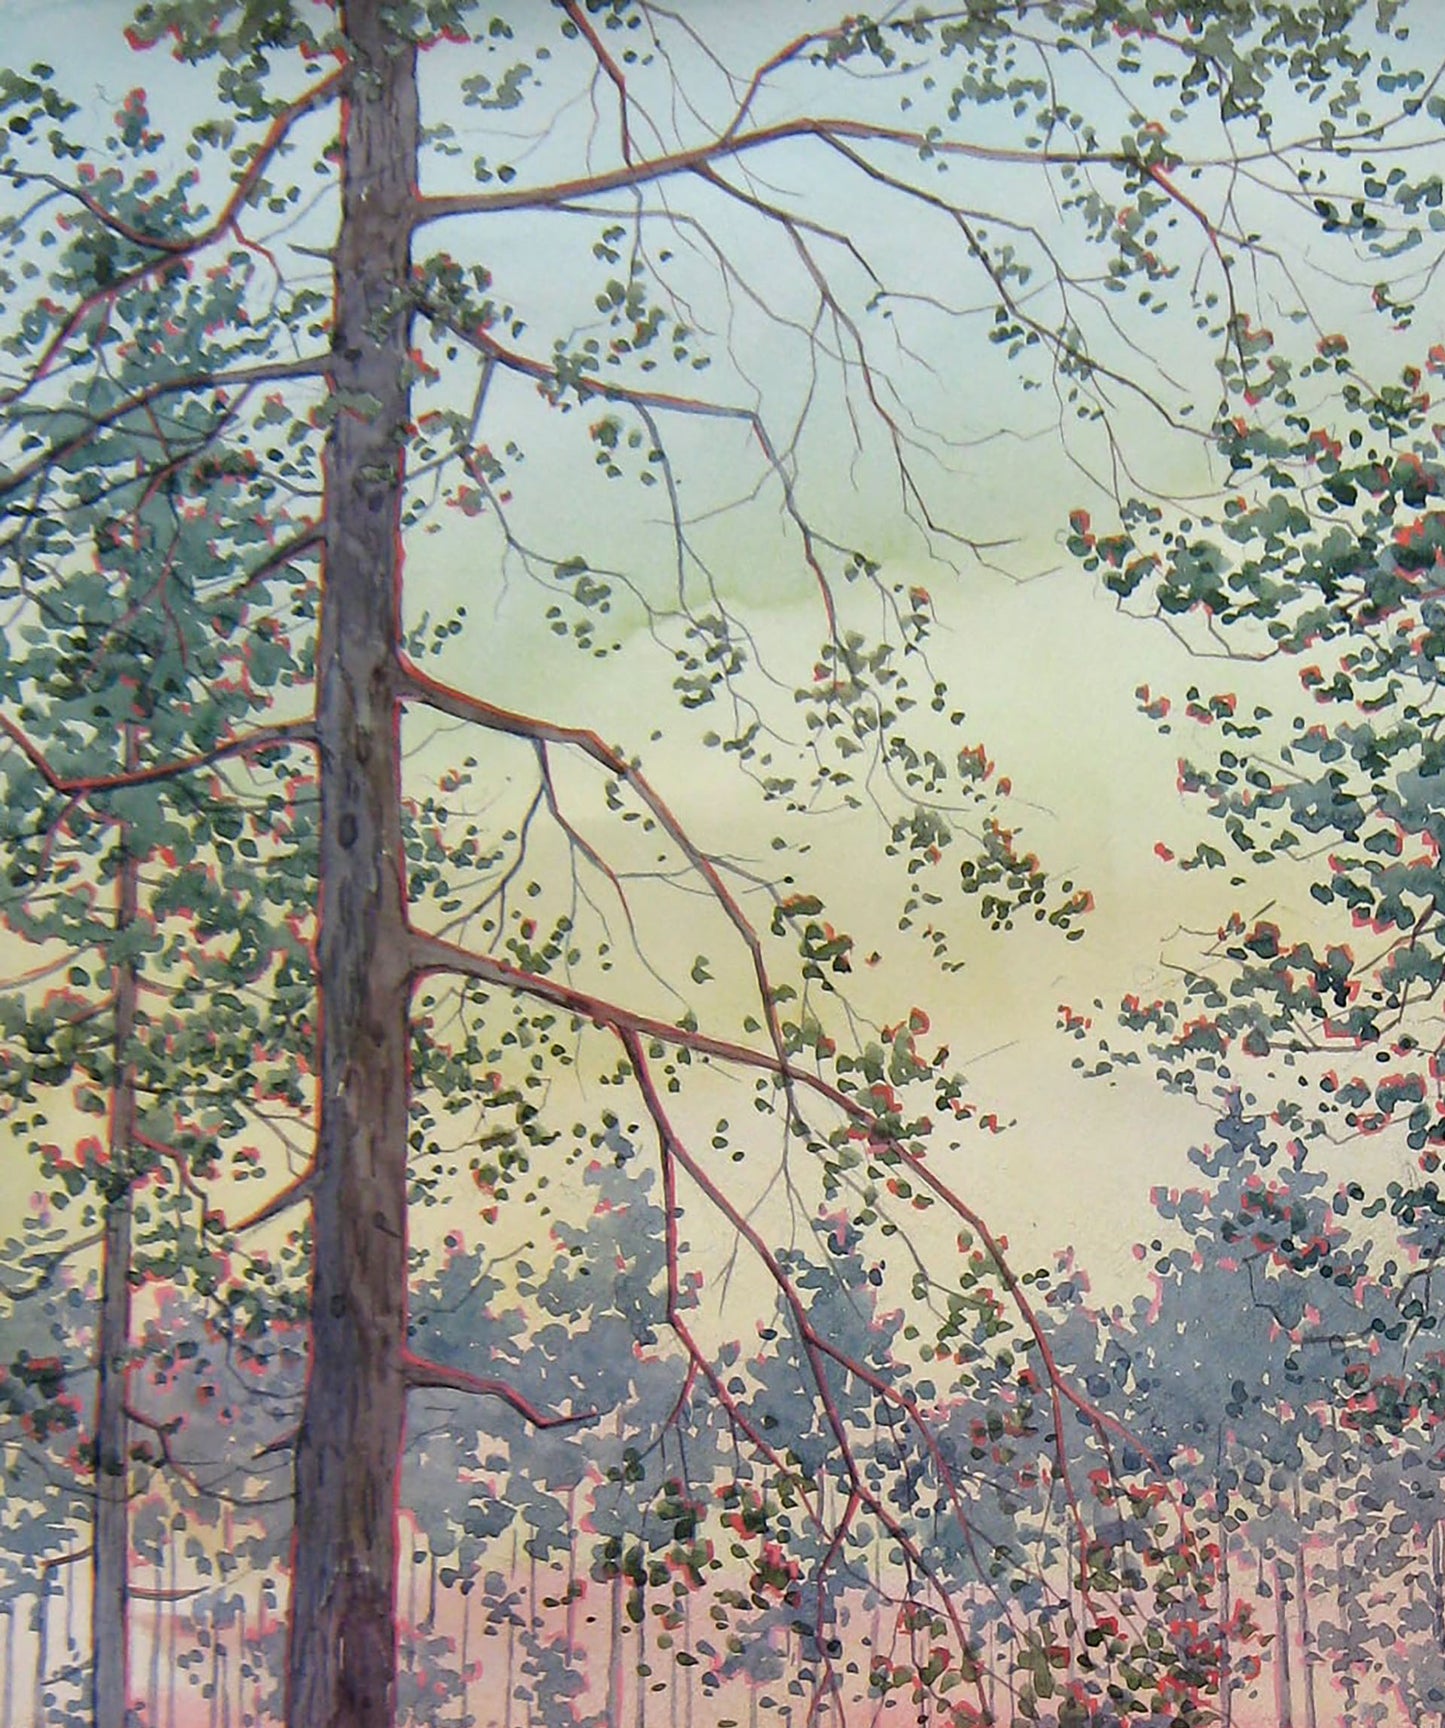 Watercolor painting "February Sunset in the Forest" by Valery Savenets